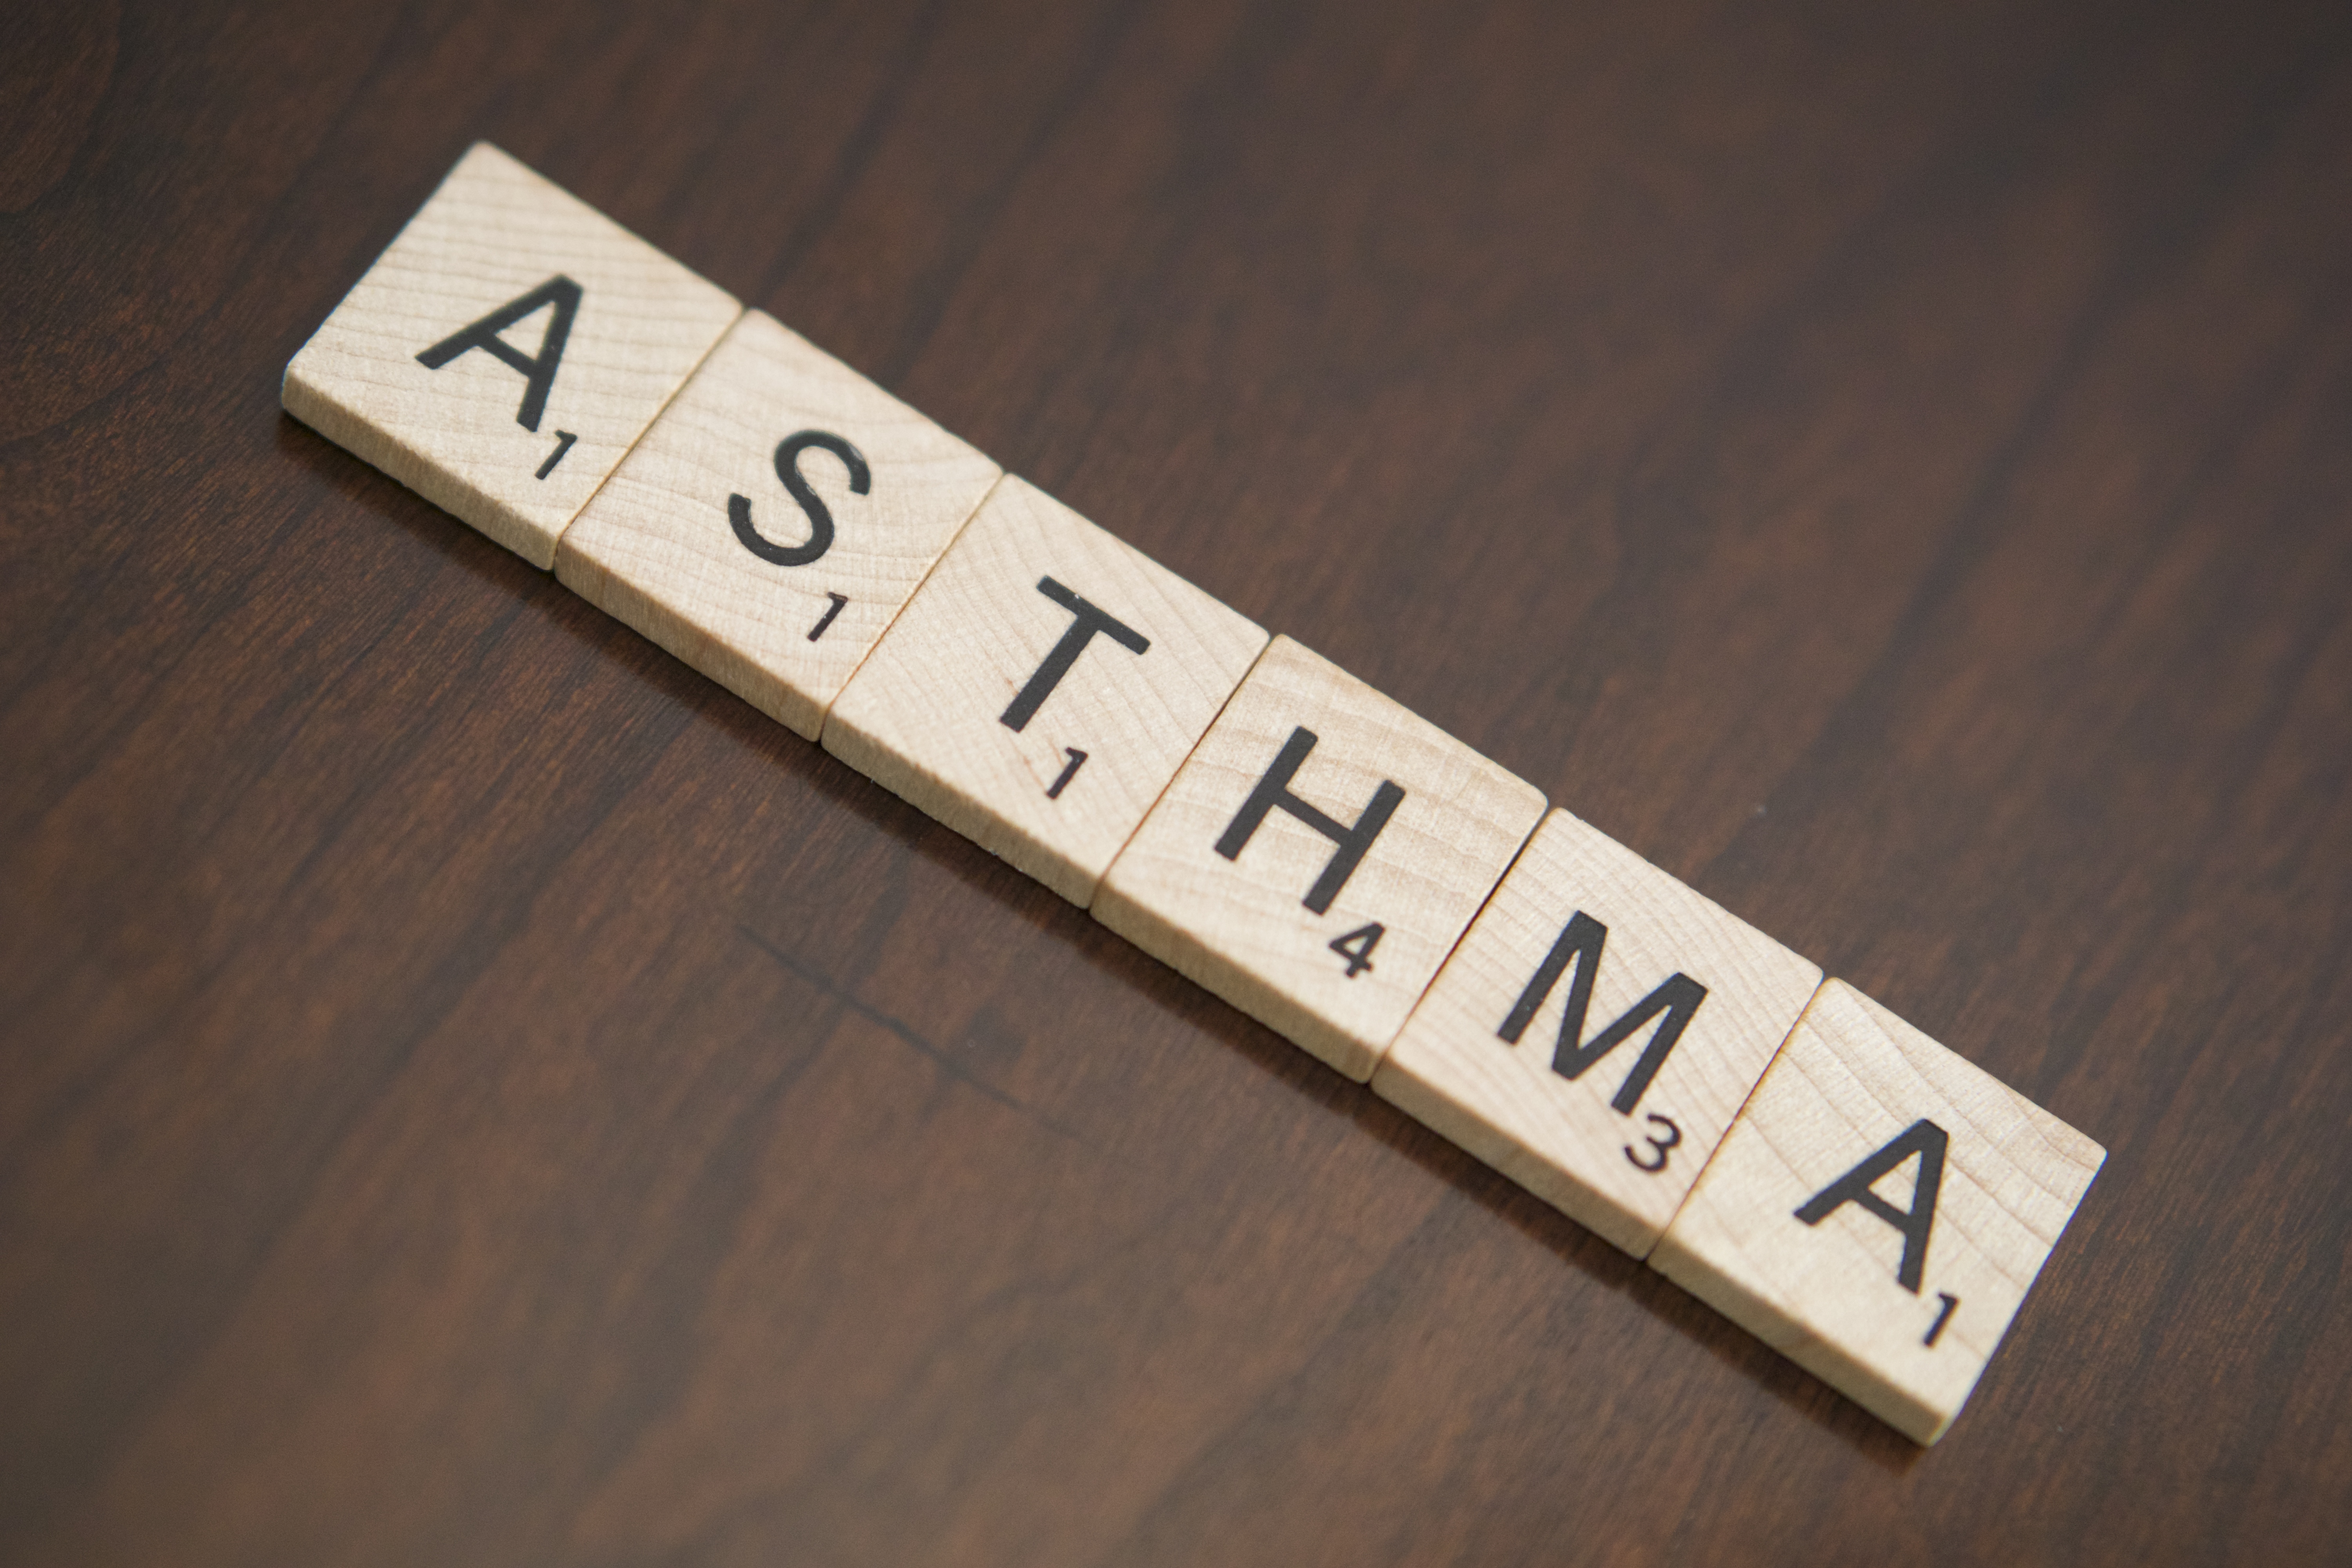 Asthma Medication: There’s More Than One